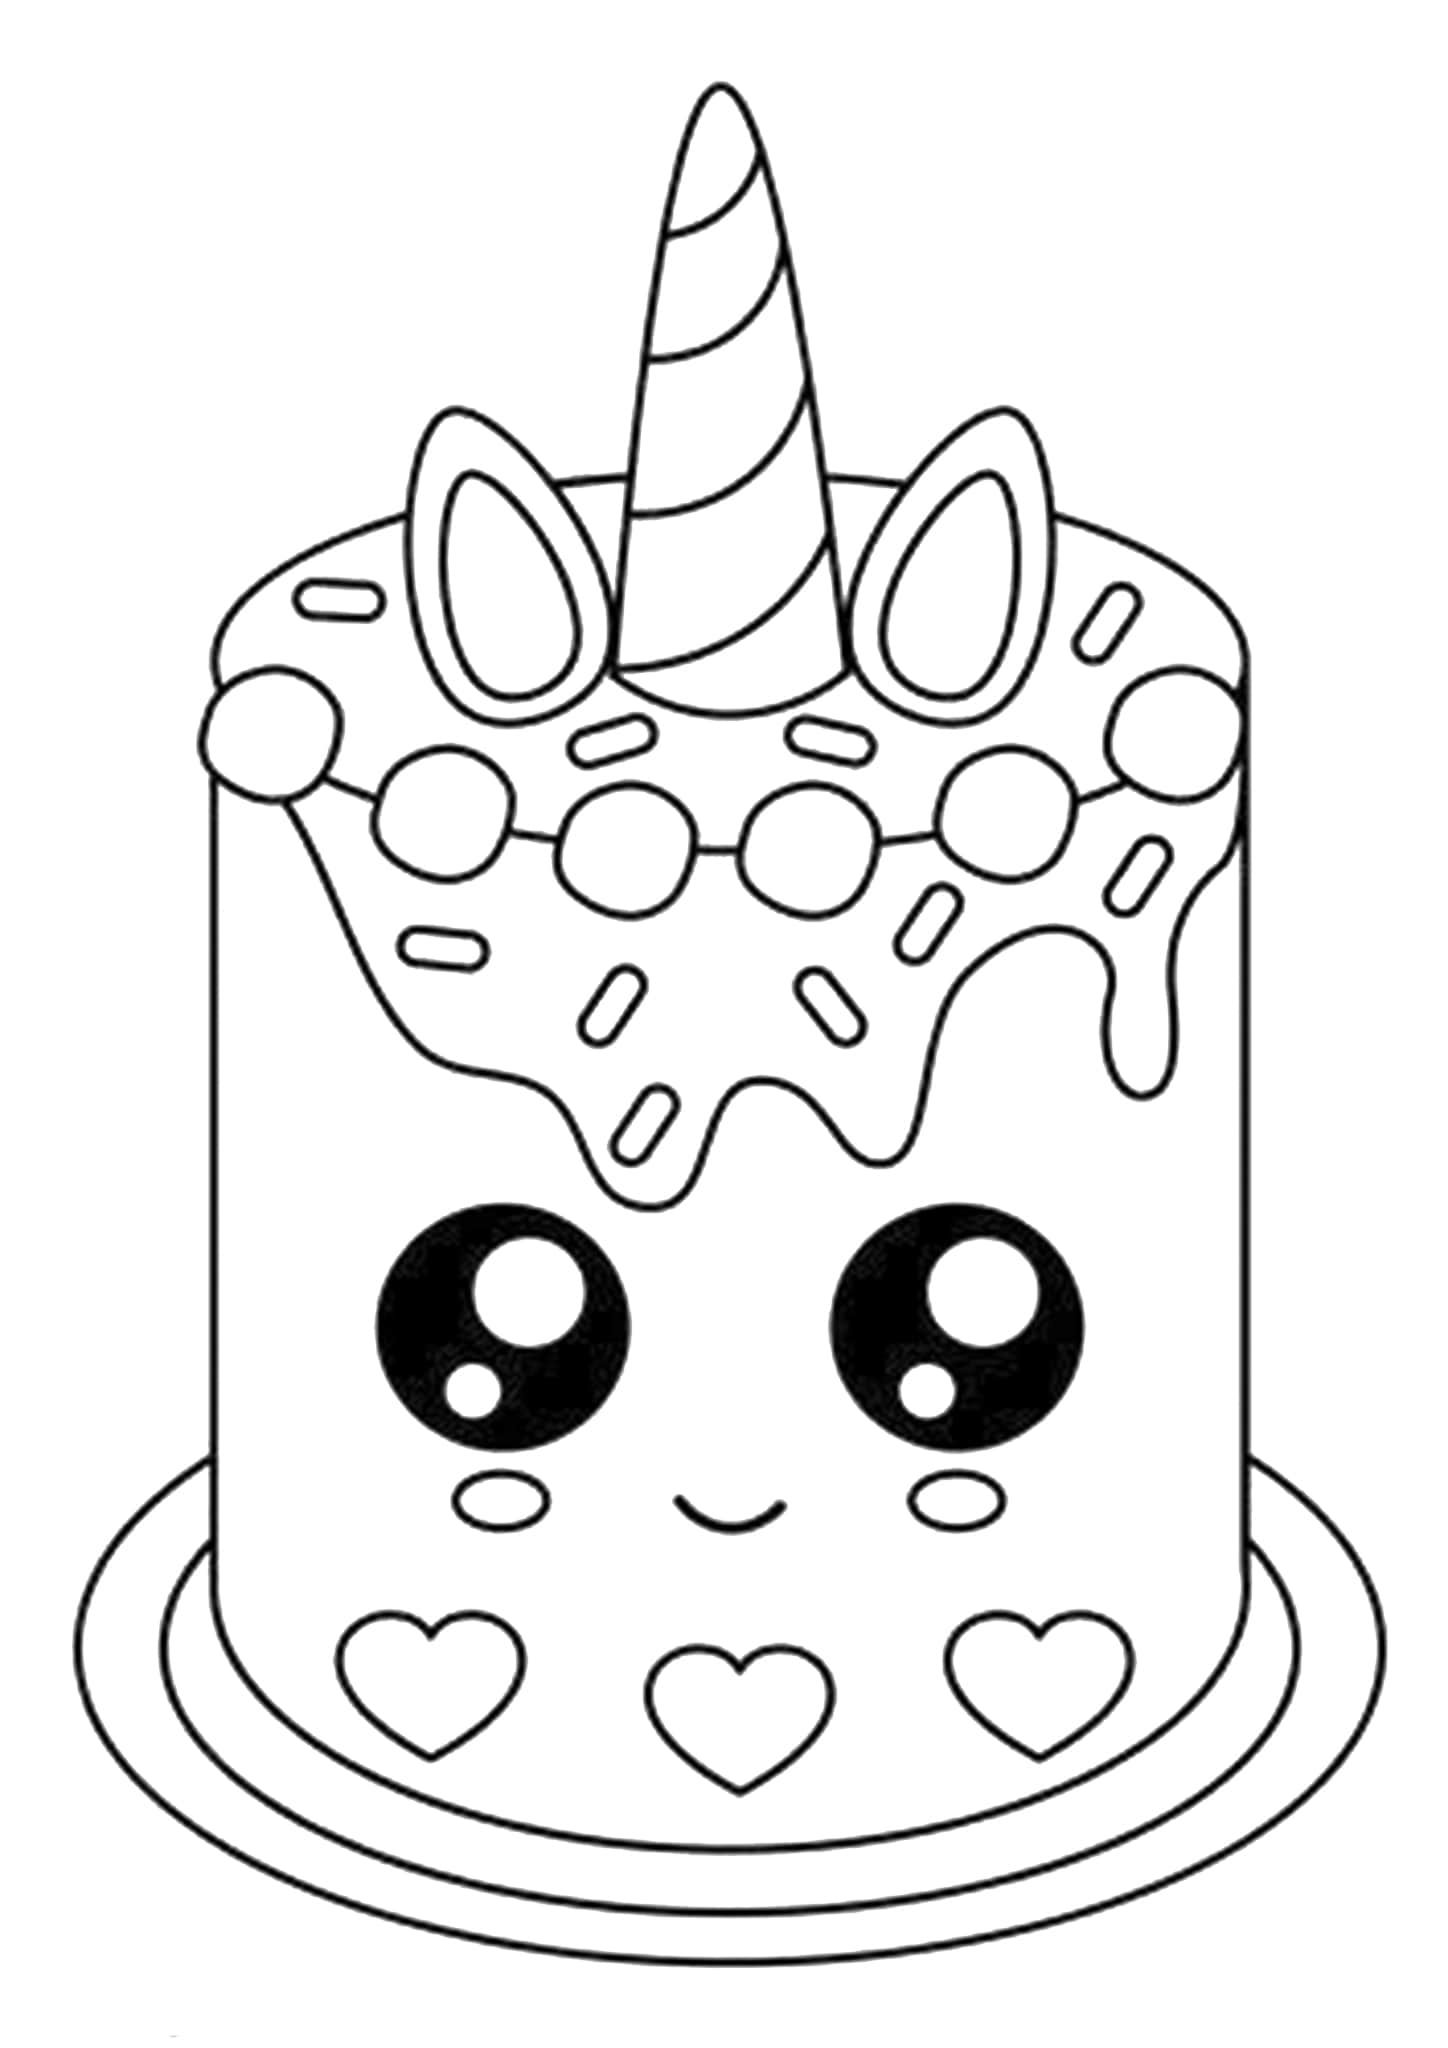 Free & Easy To Print Cake Coloring Pages | Cupcake coloring pages, Unicorn  coloring pages, Puppy coloring pages